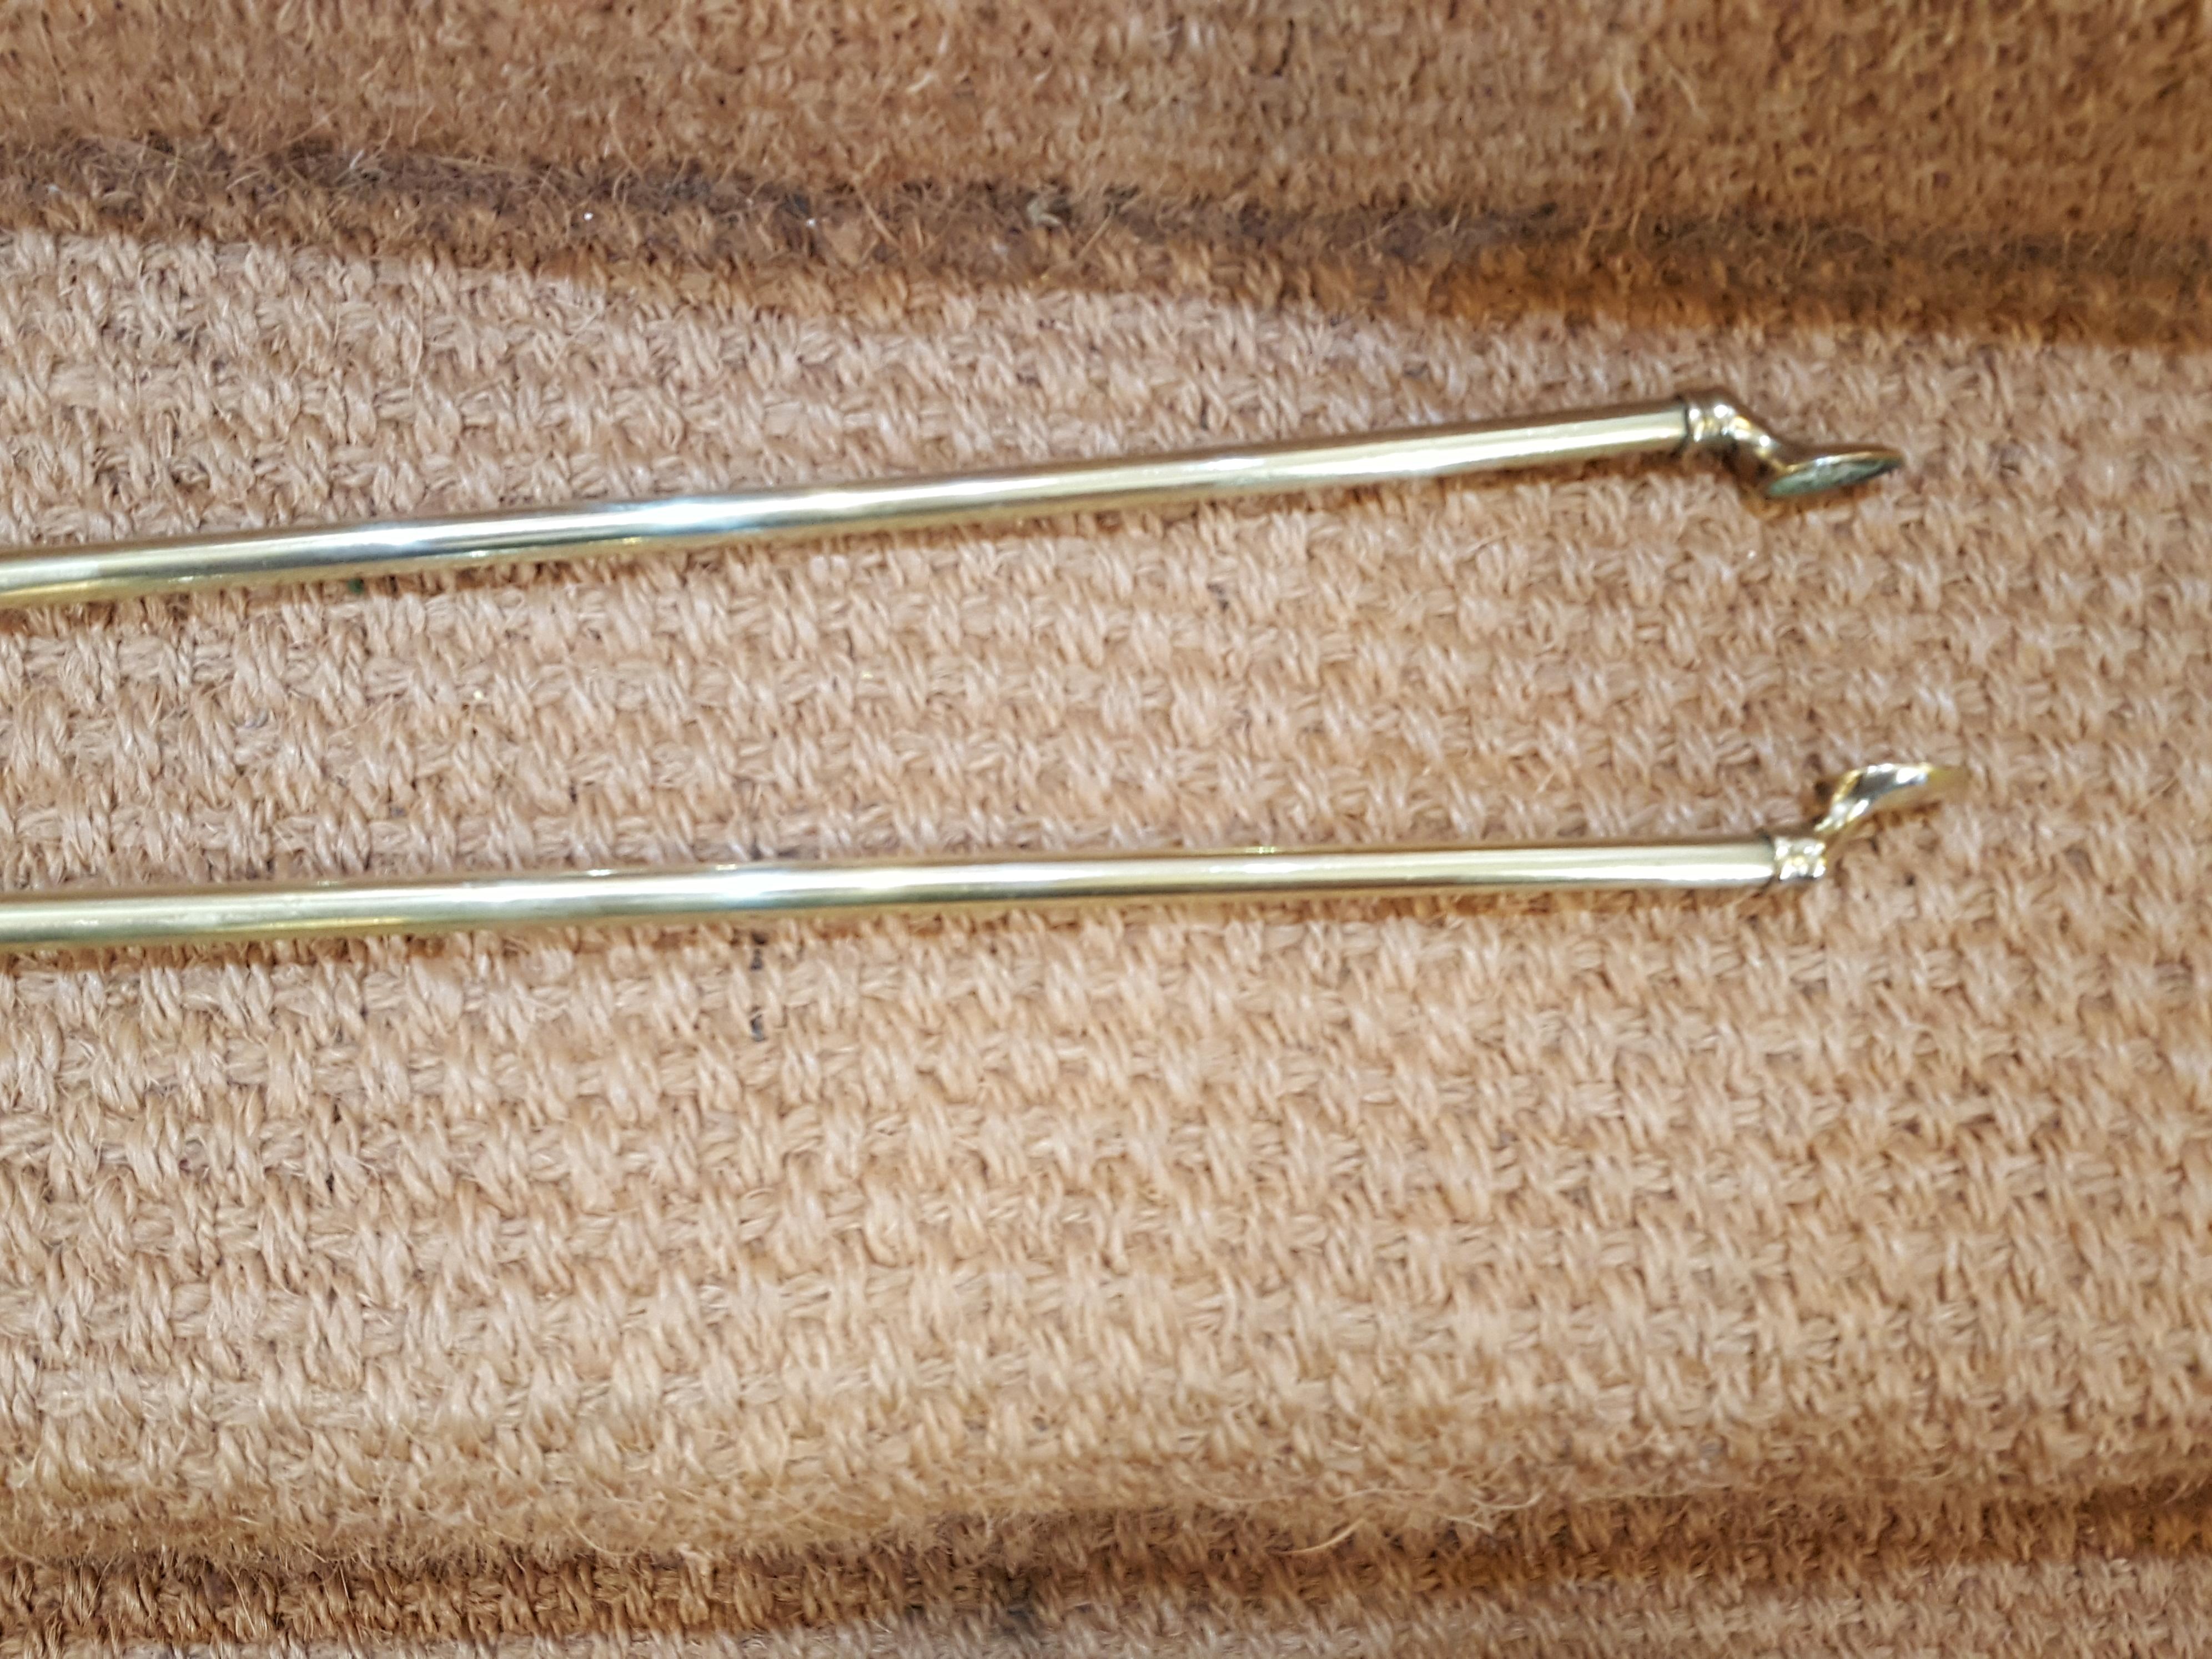 Set of 1920s Brass Fire Irons with Dogs 1